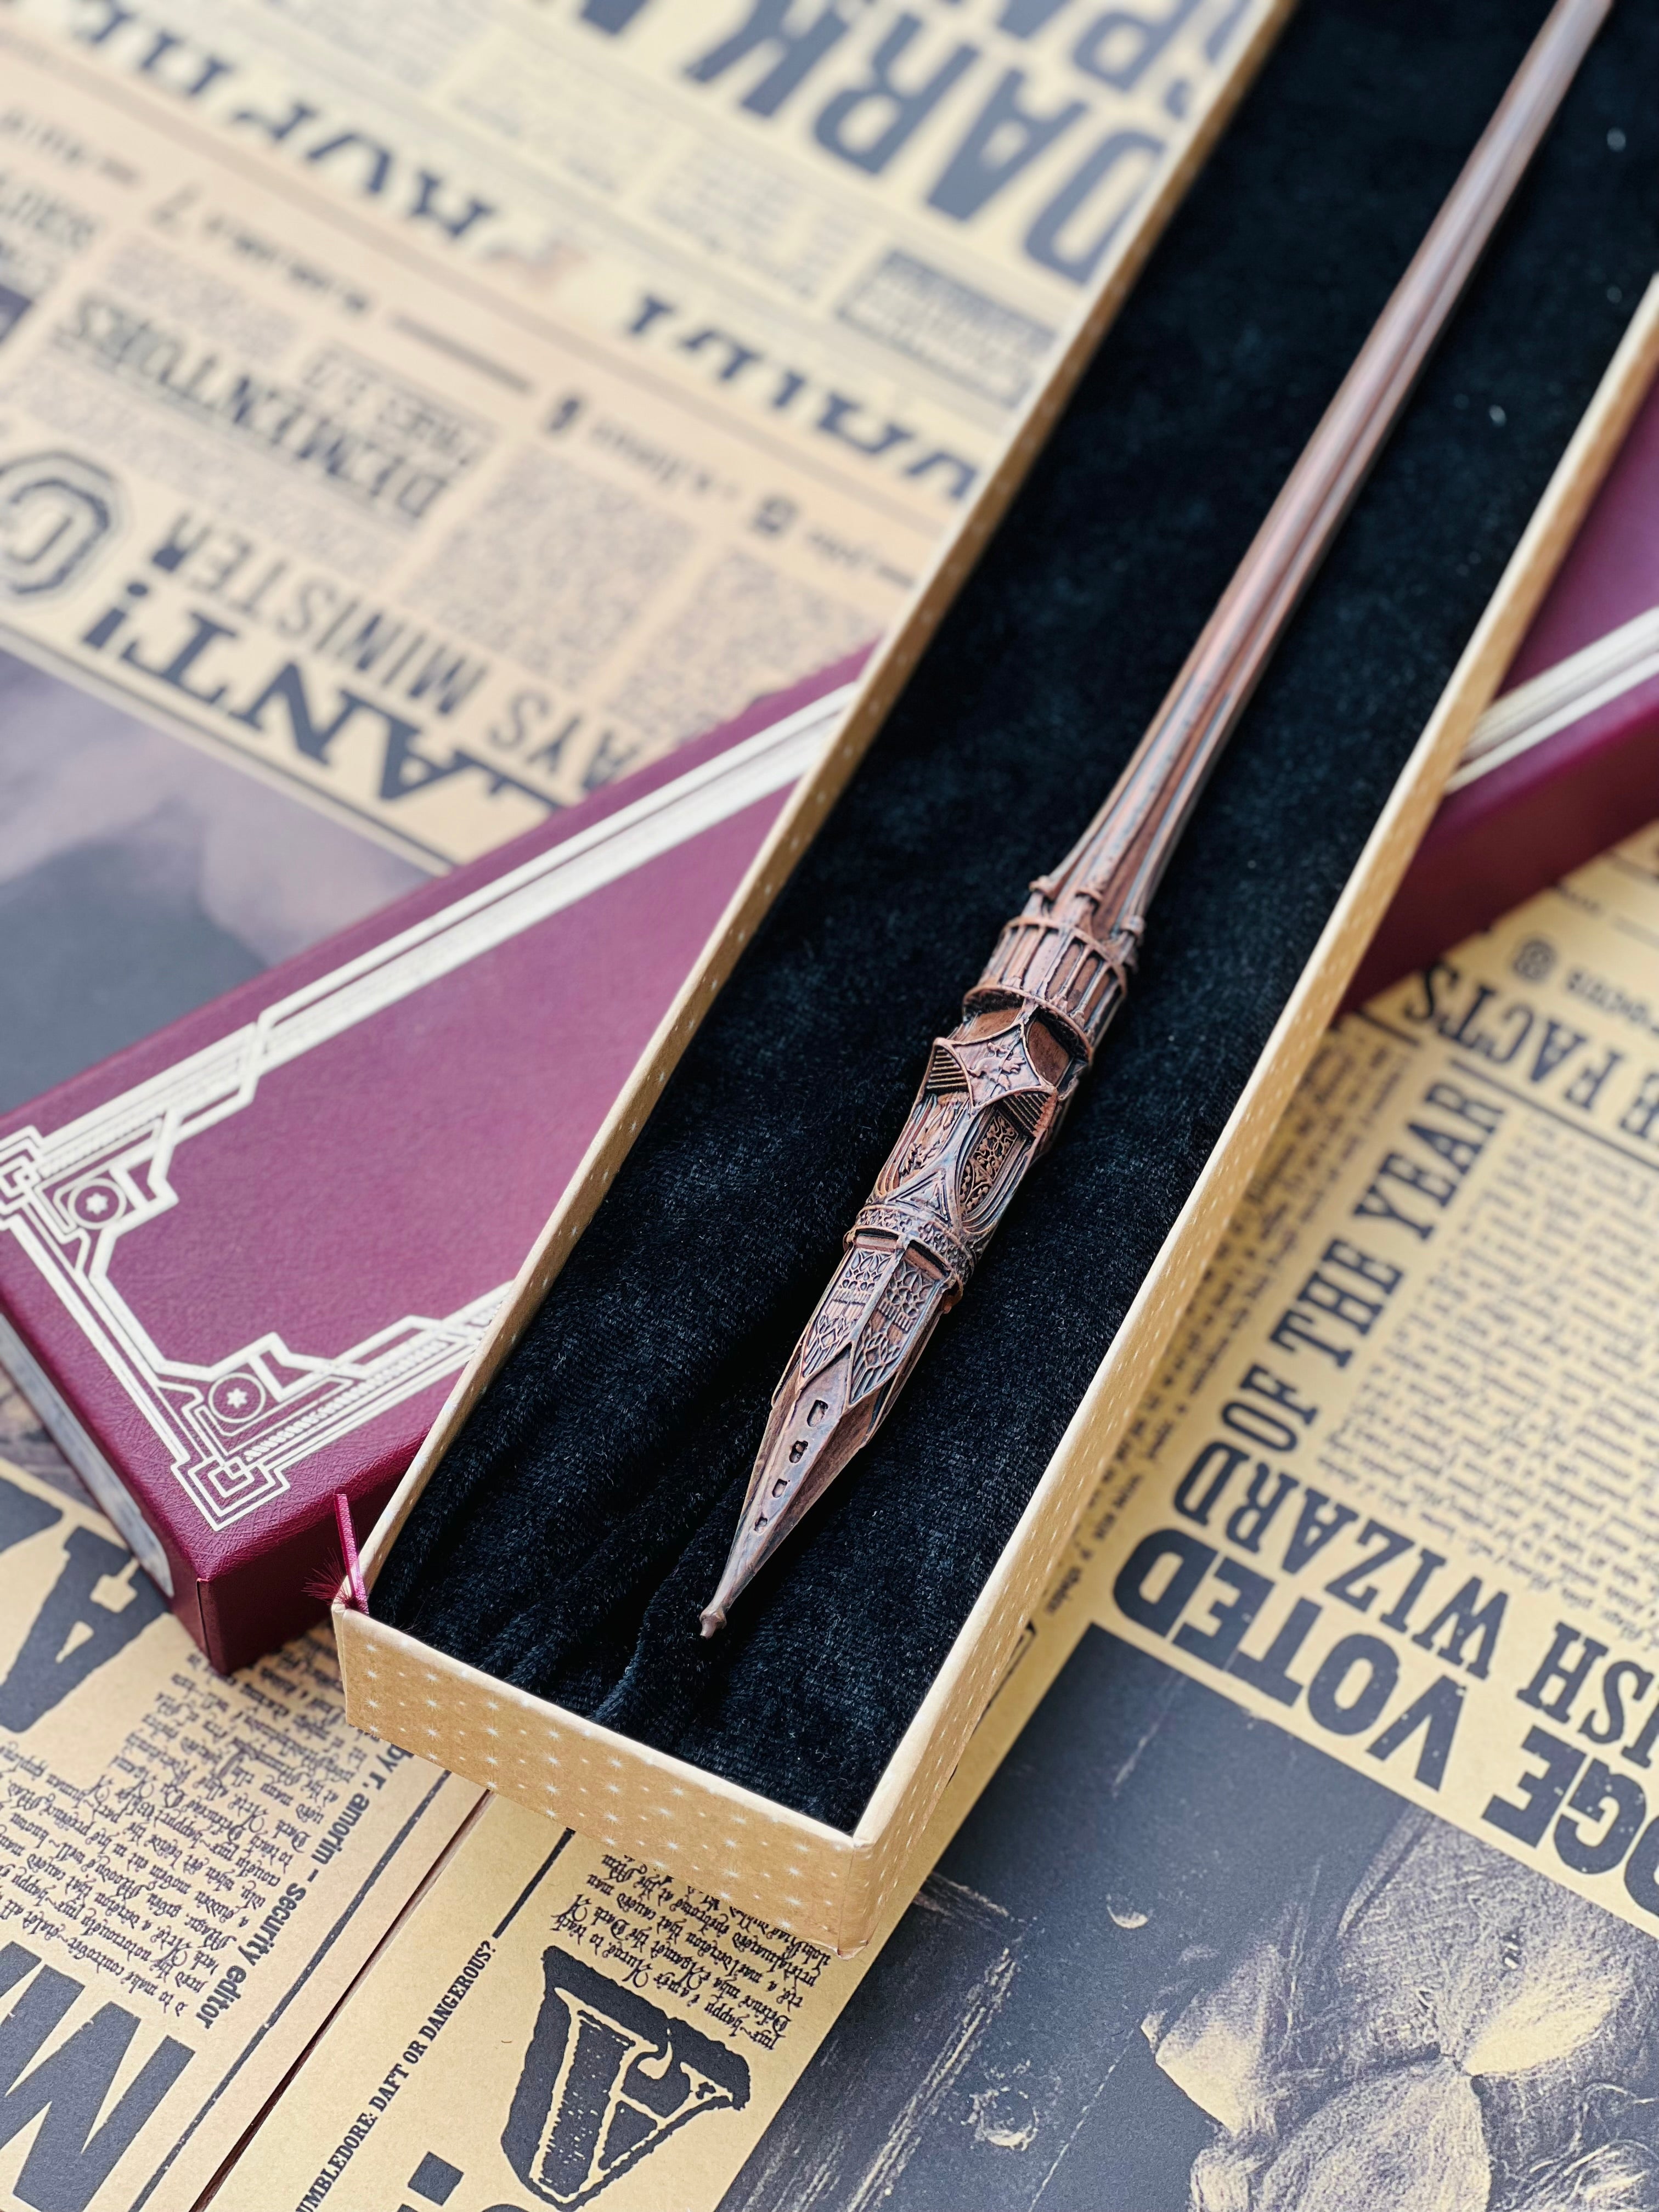 Hogwarts Tower Collectible Wand